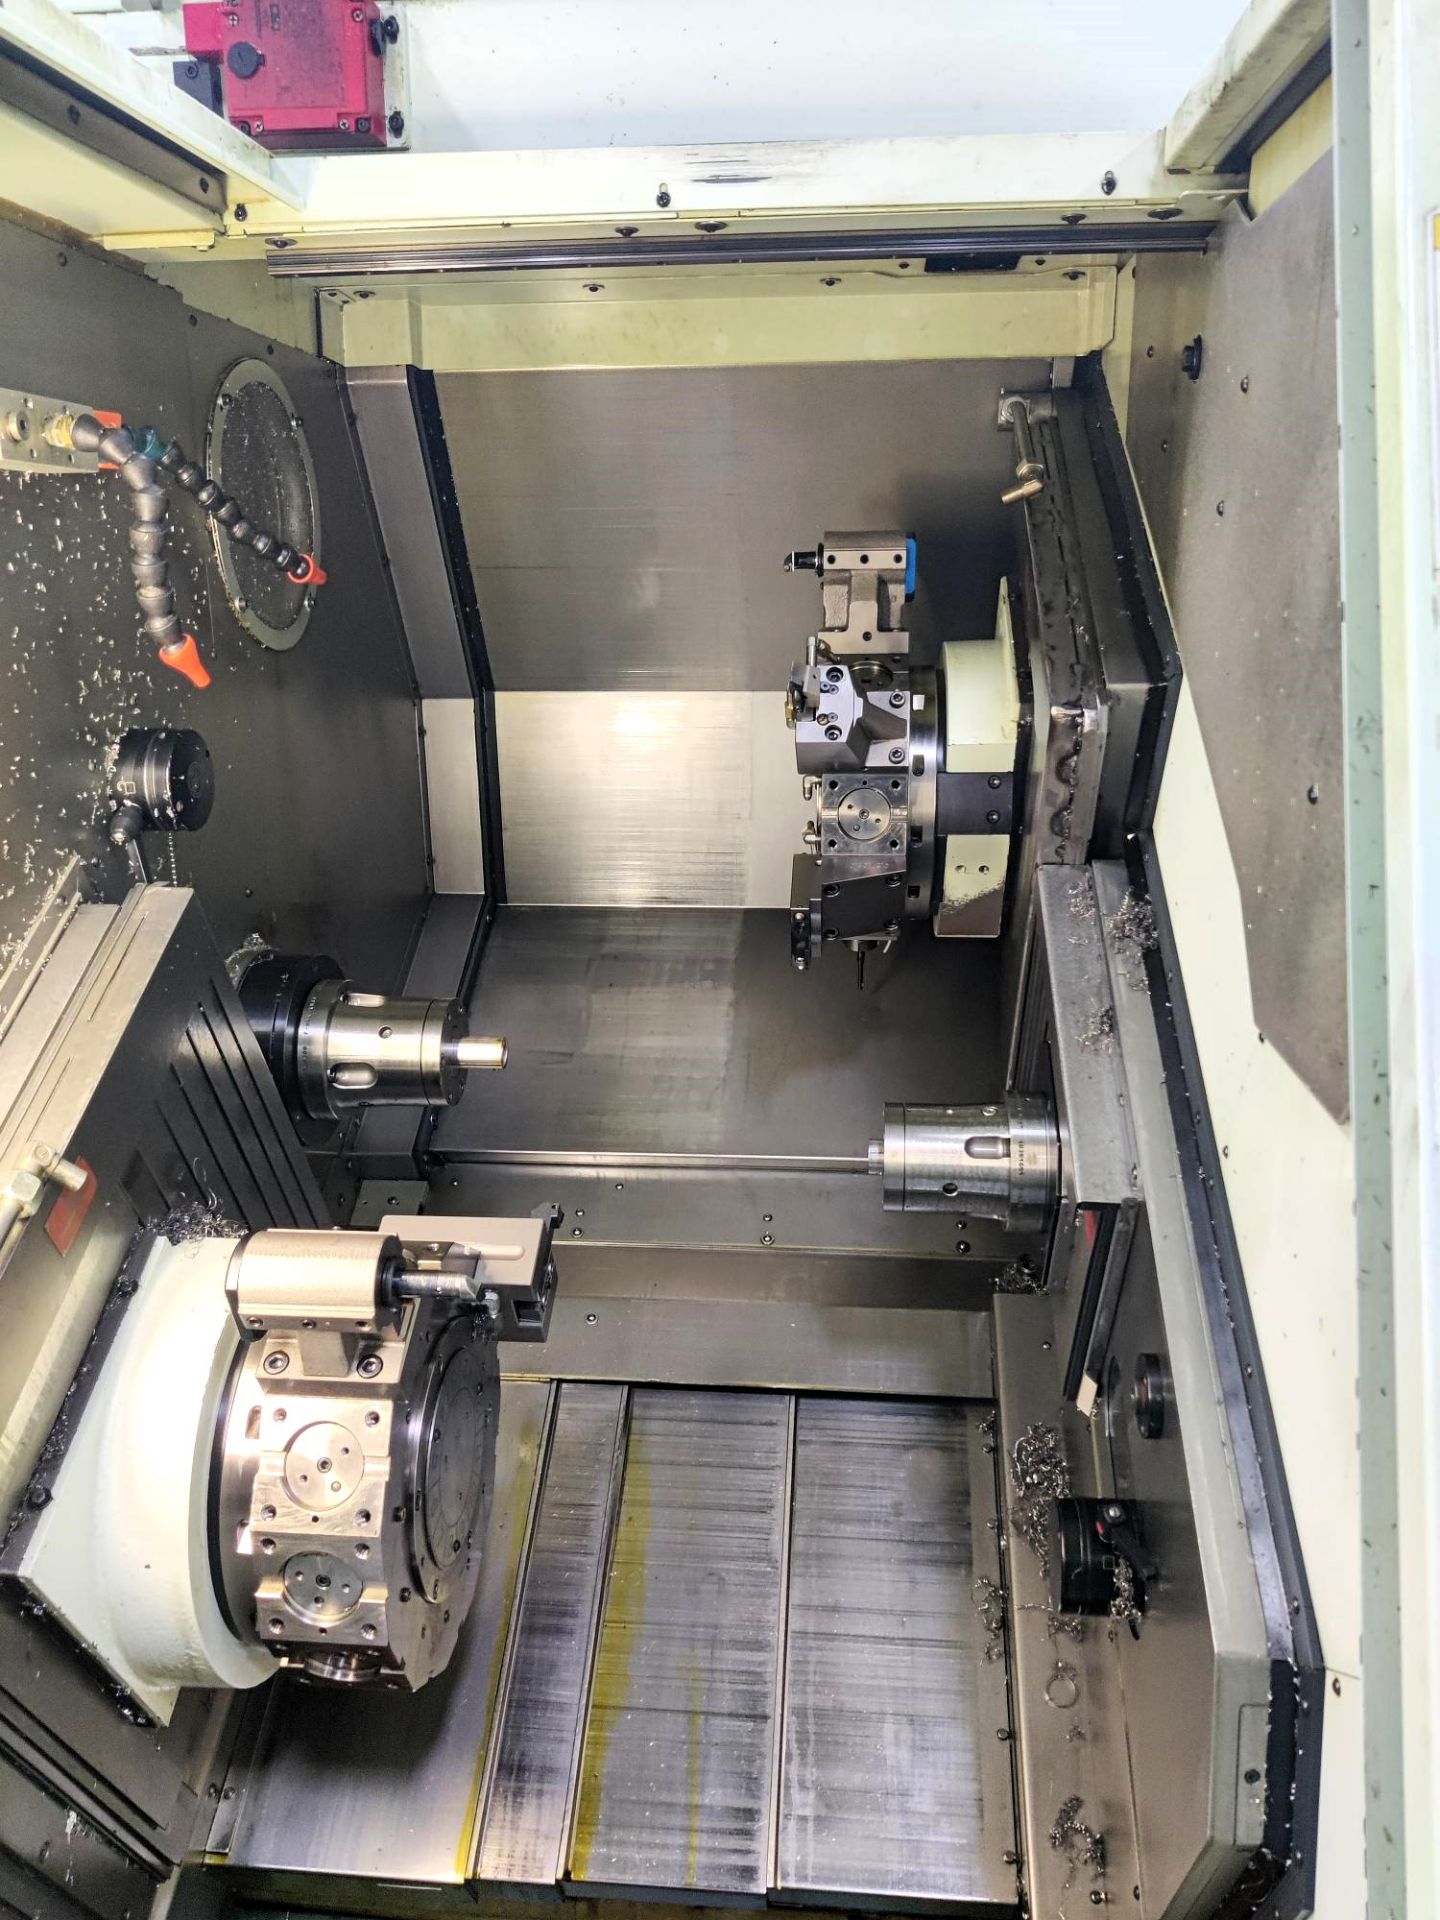 EUROTECH ELITE B446 Y2 TWIN SPINDLE TWIN TURRET CNC LATHE W/DUAL Y-AXIS, NEW 2009, SN 10534 - Image 2 of 8